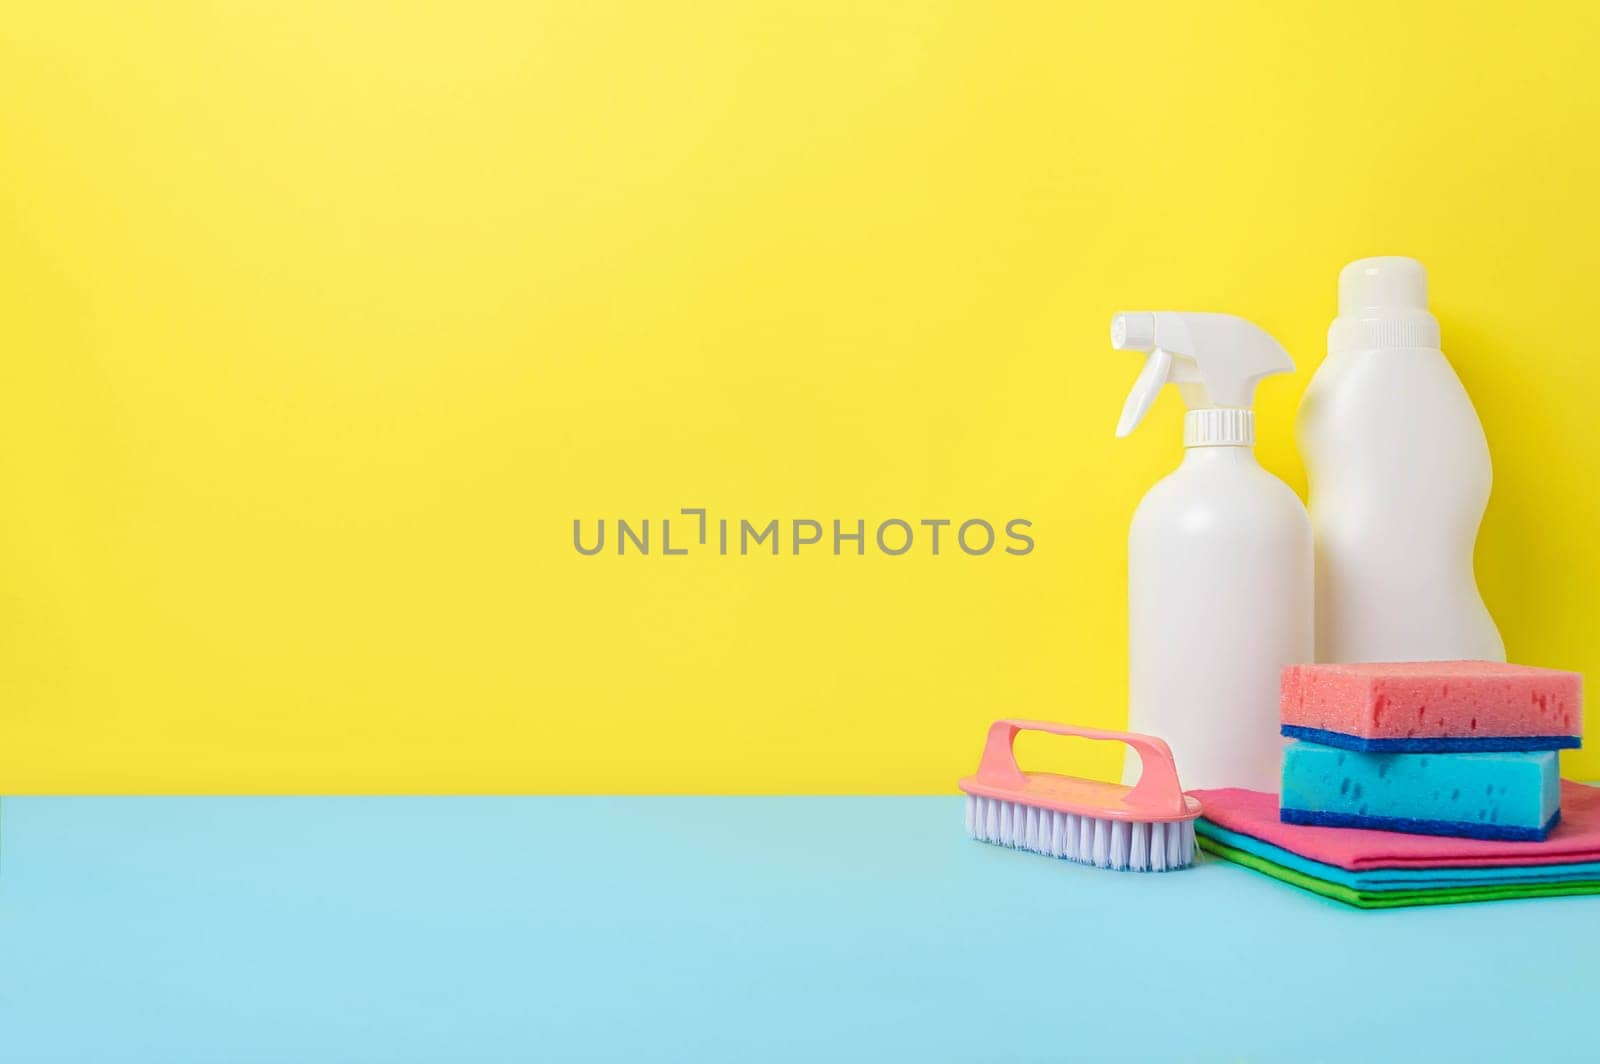 House cleaning products on yellow blue background, copy space. Cleaning service or housekeeping concept with space for text or design